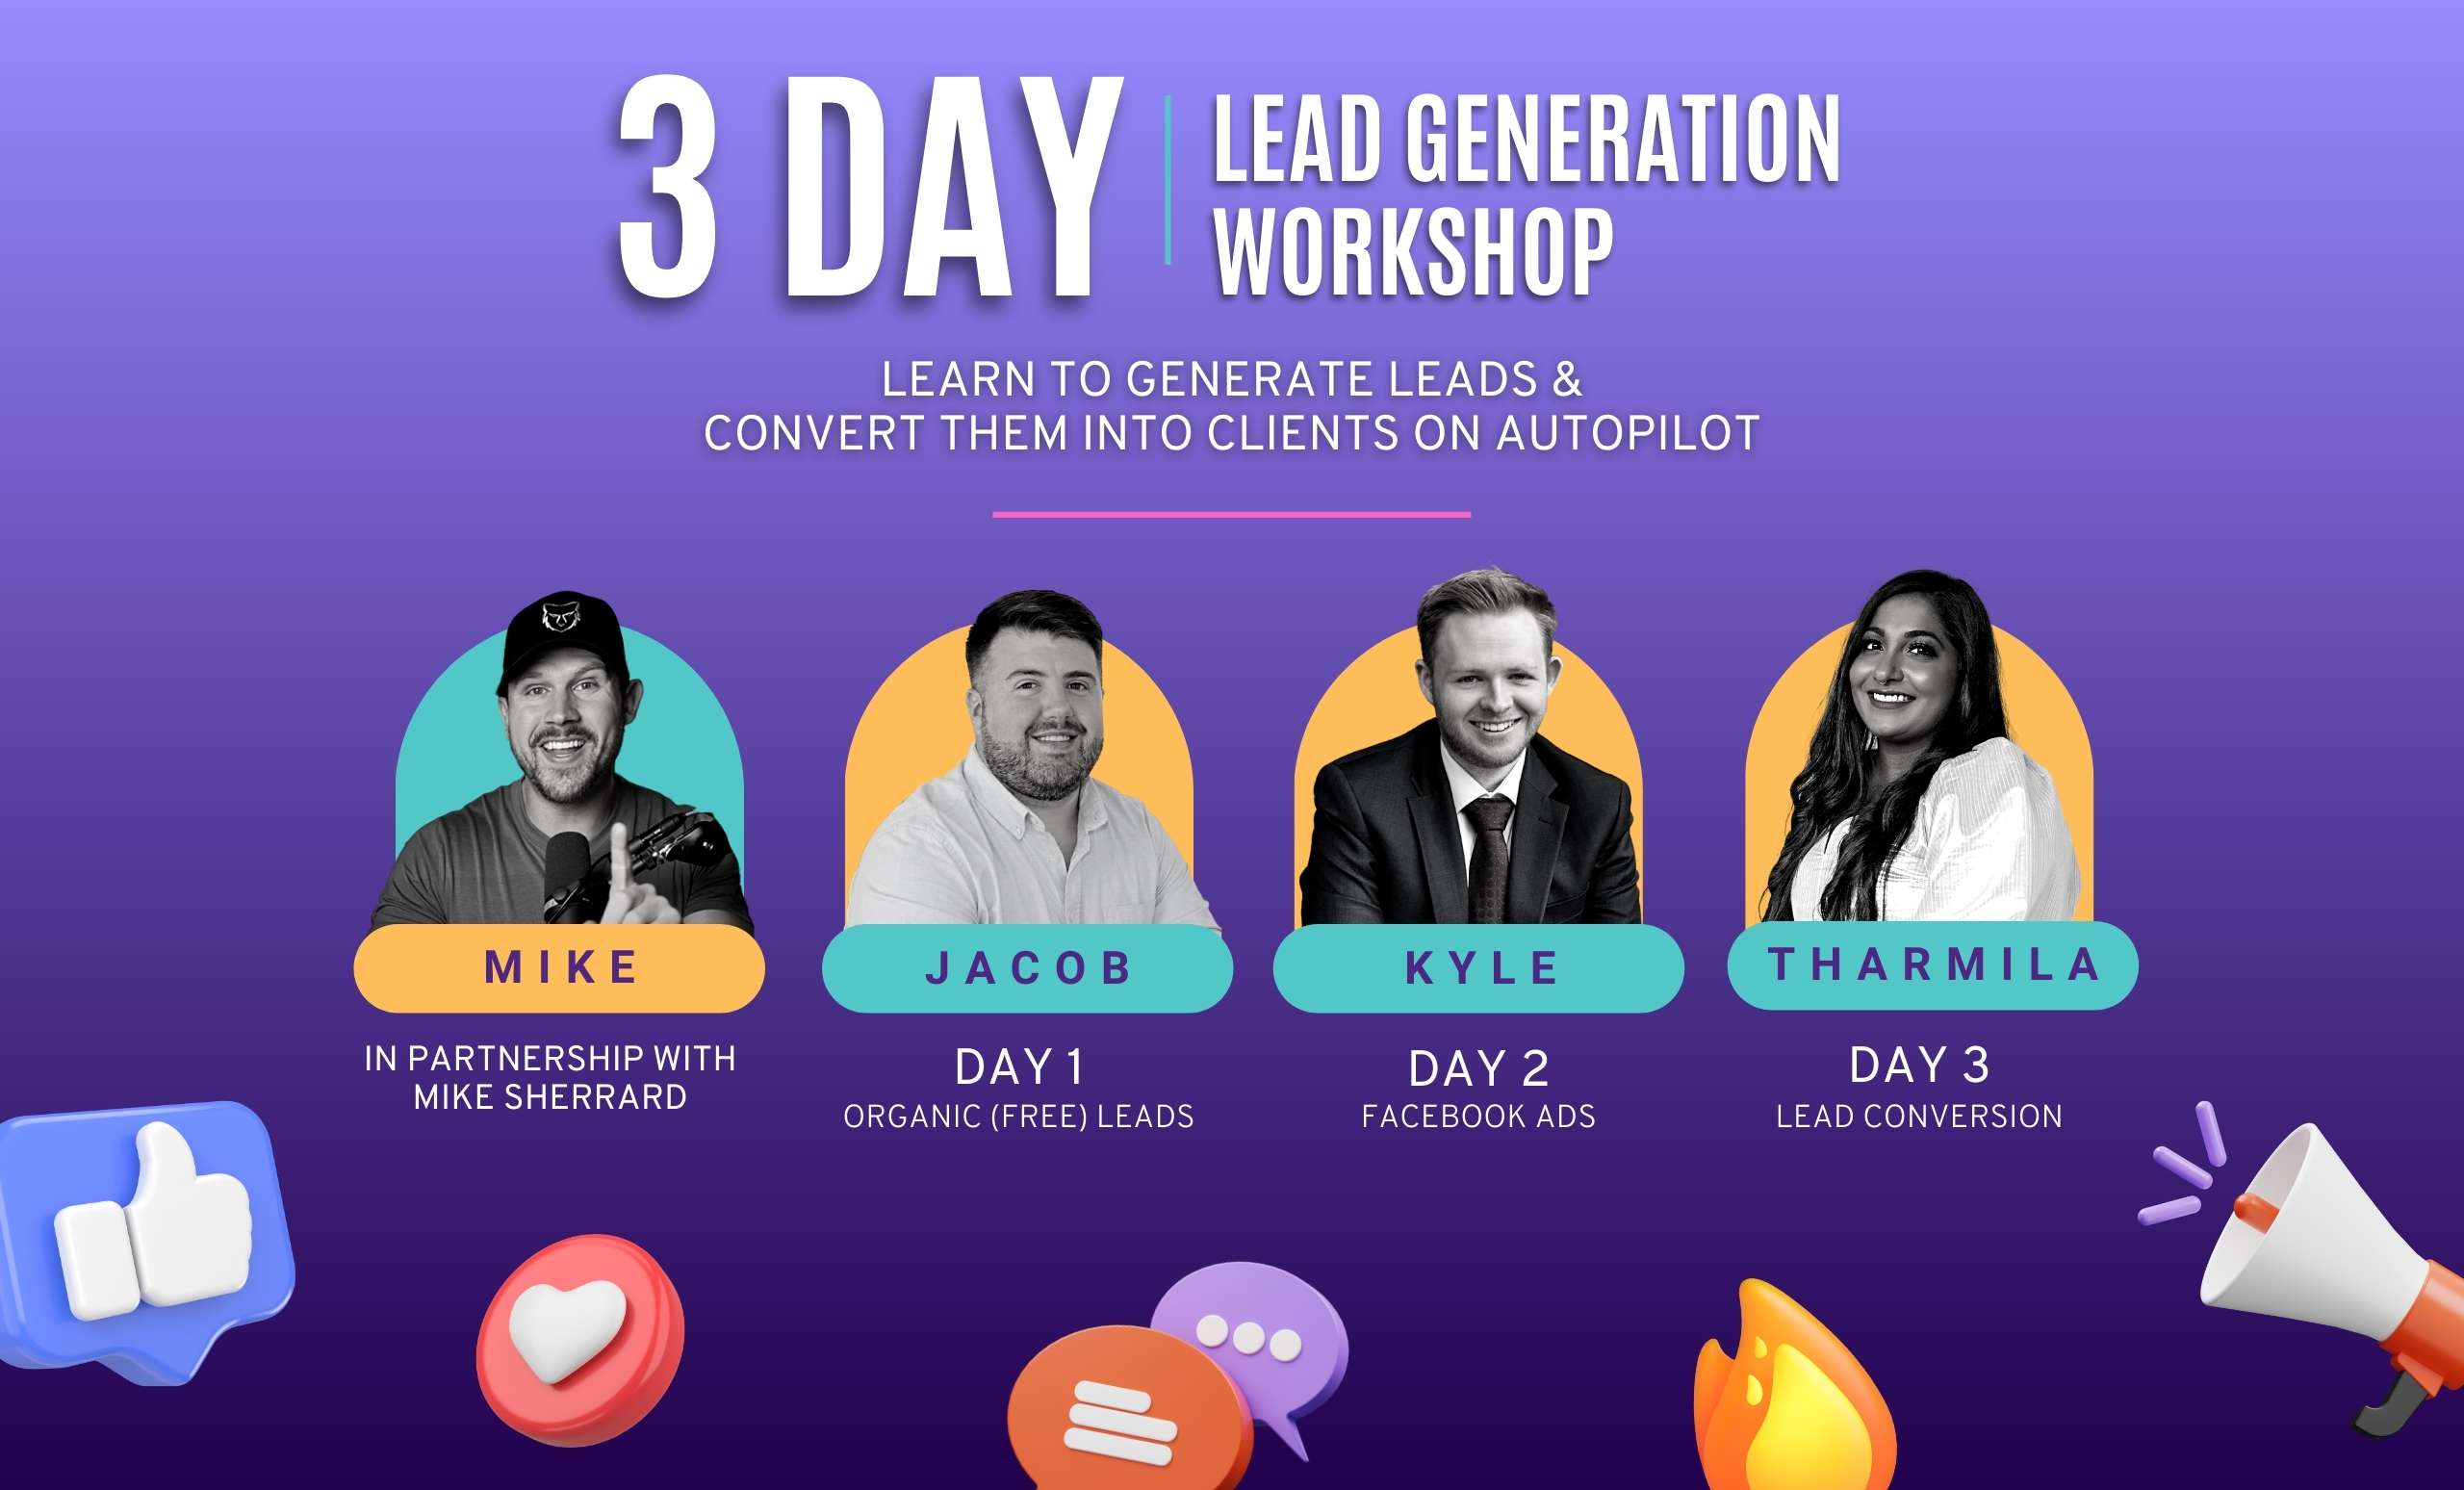 3 Day lead generation workshop for real estate agents